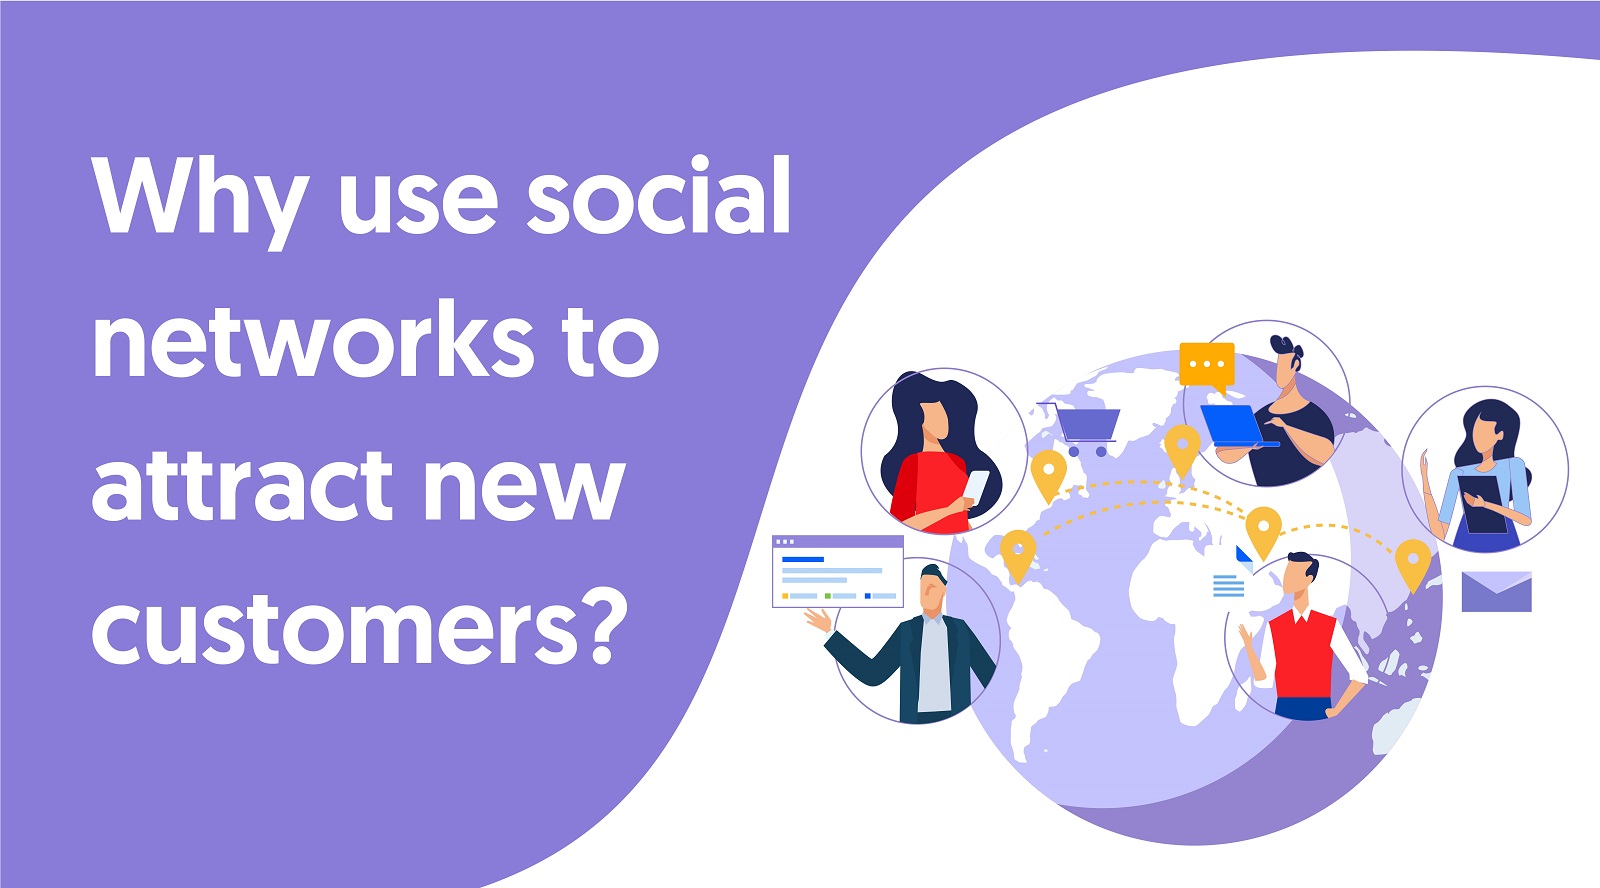 How to use social networks to attract more customers